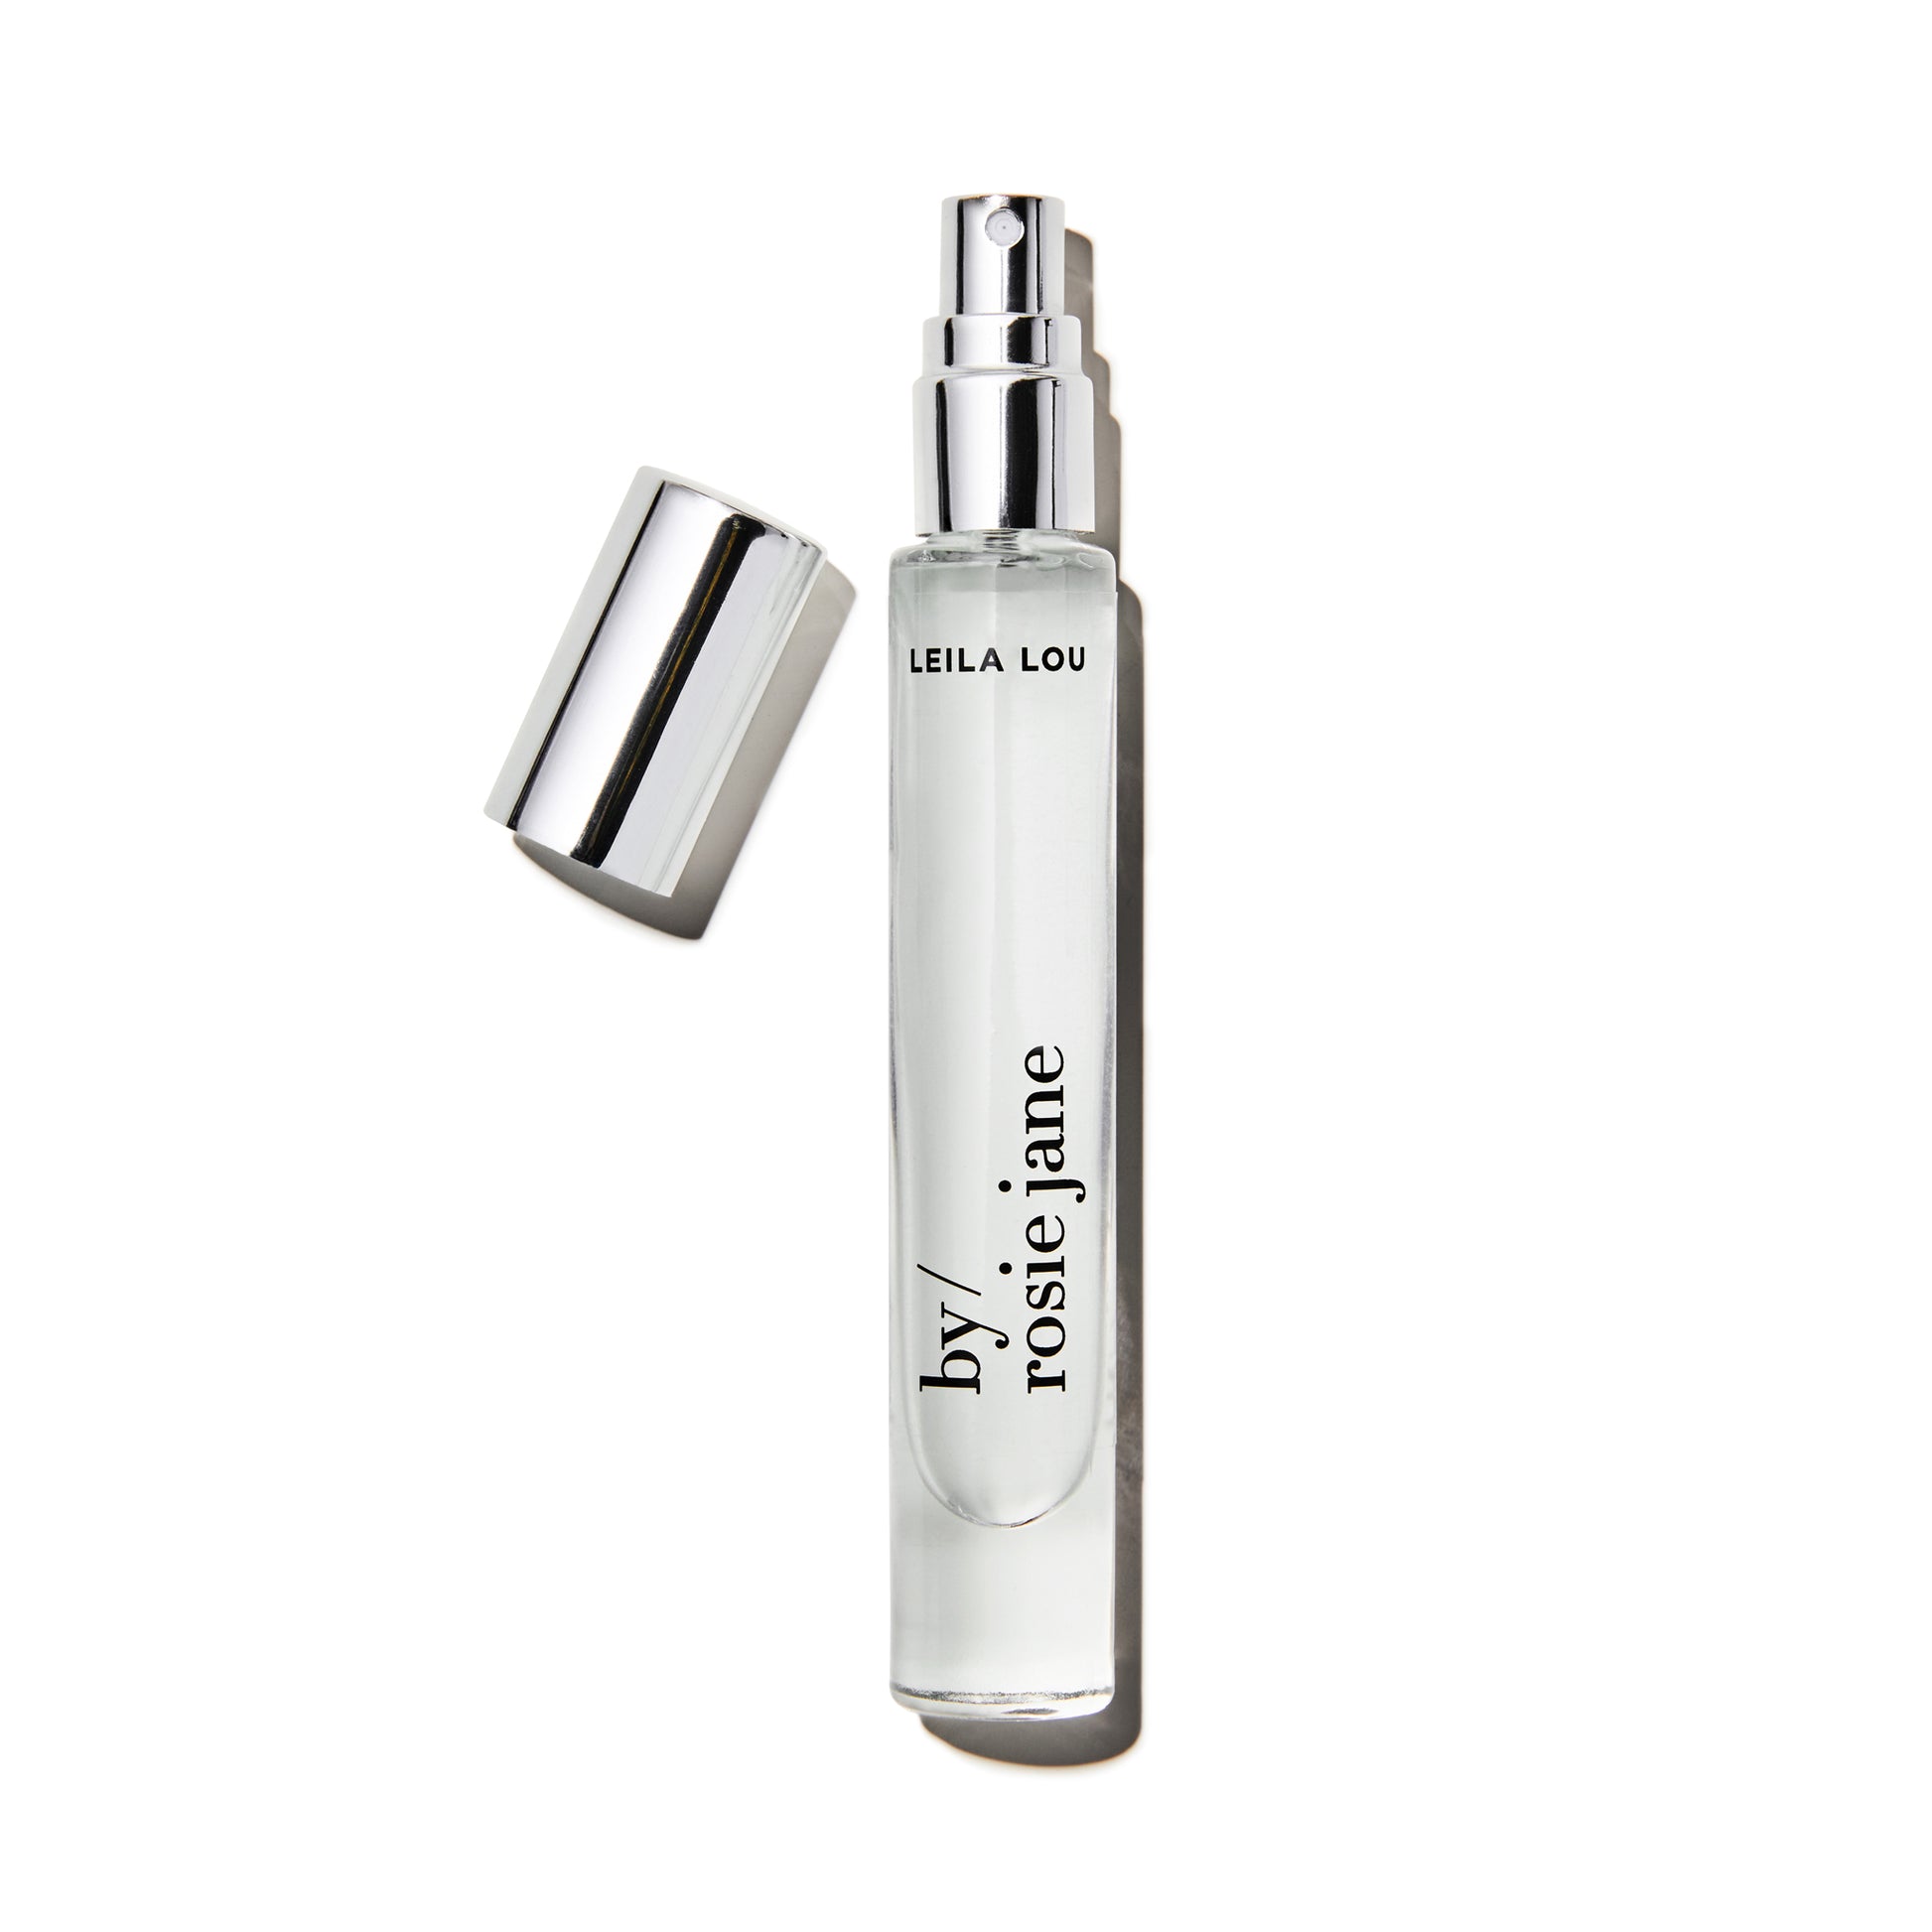 Leila Lou Travel Spray without the lid